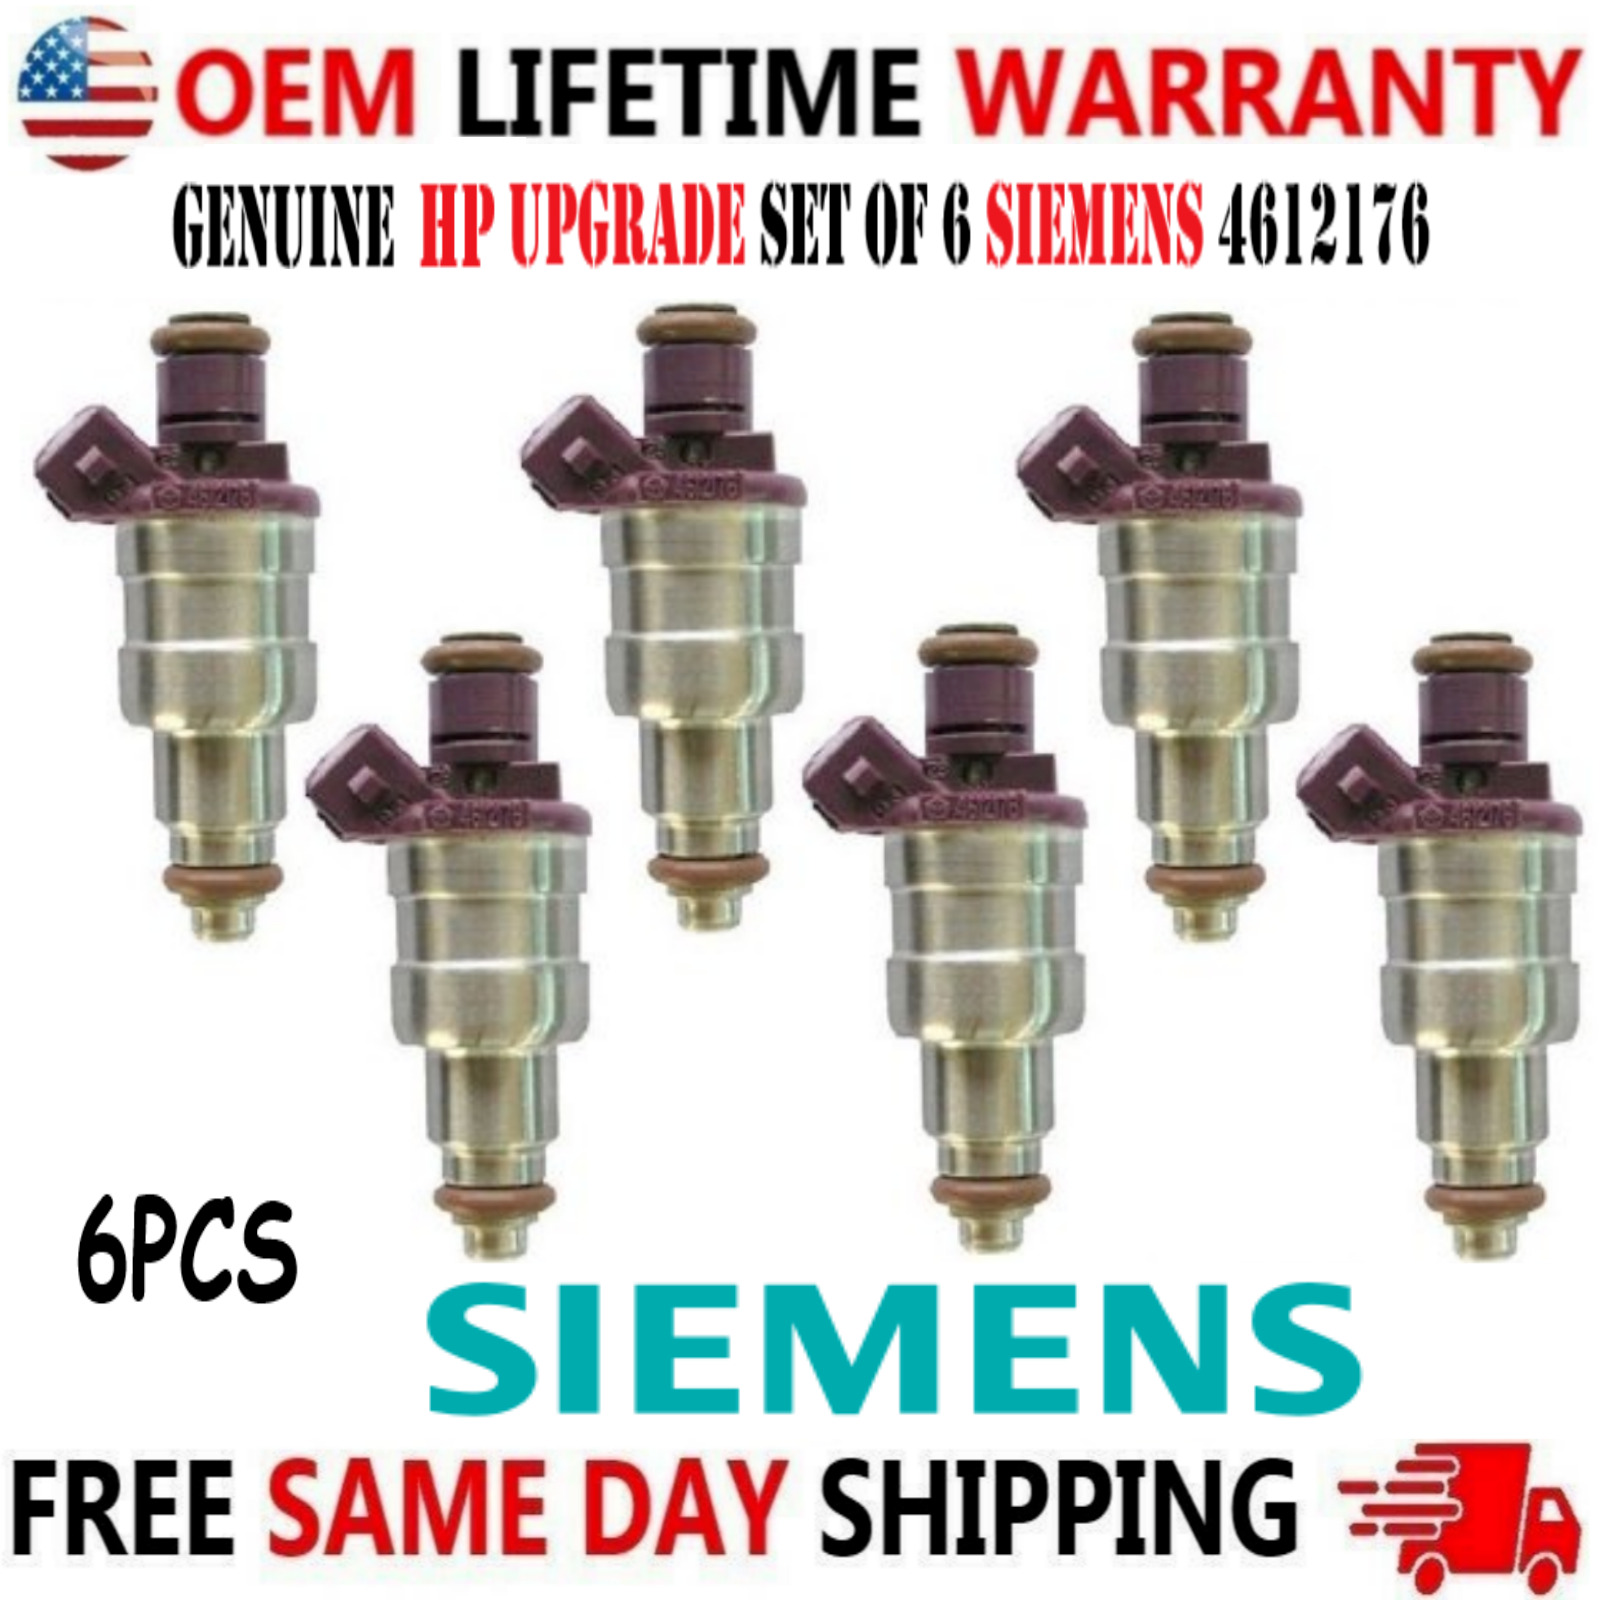 OEM 6 Units (6pcs) Siemens Fuel Injectors for 1992-1993 Plymouth Voyager 3.3L V6